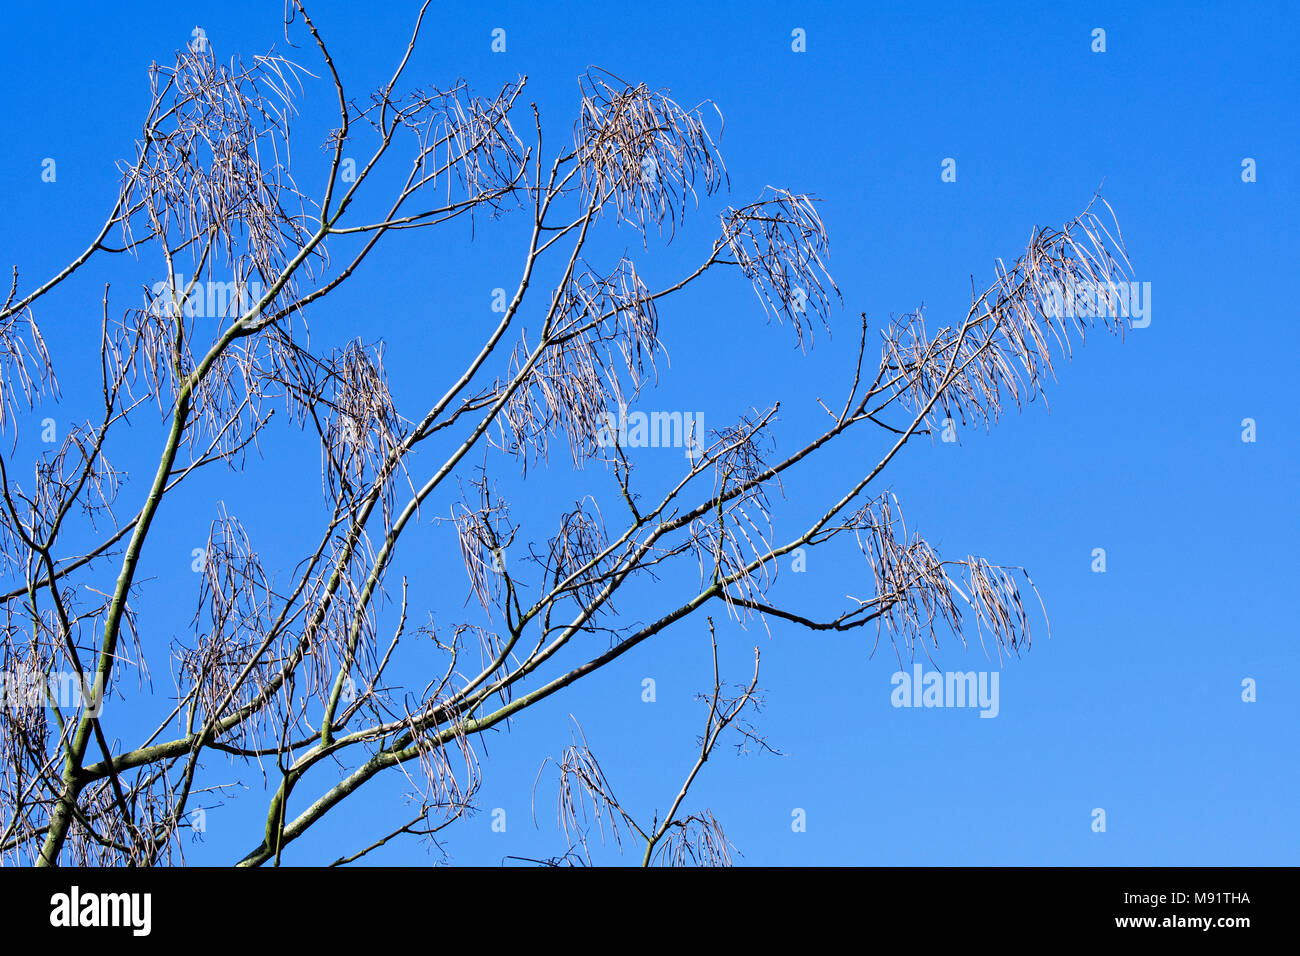 Yellow catalpa / Chinese catalpa (Catalpa ovata), pod-bearing tree native to China showing long pods against blue sky in late winter / early spring Stock Photo